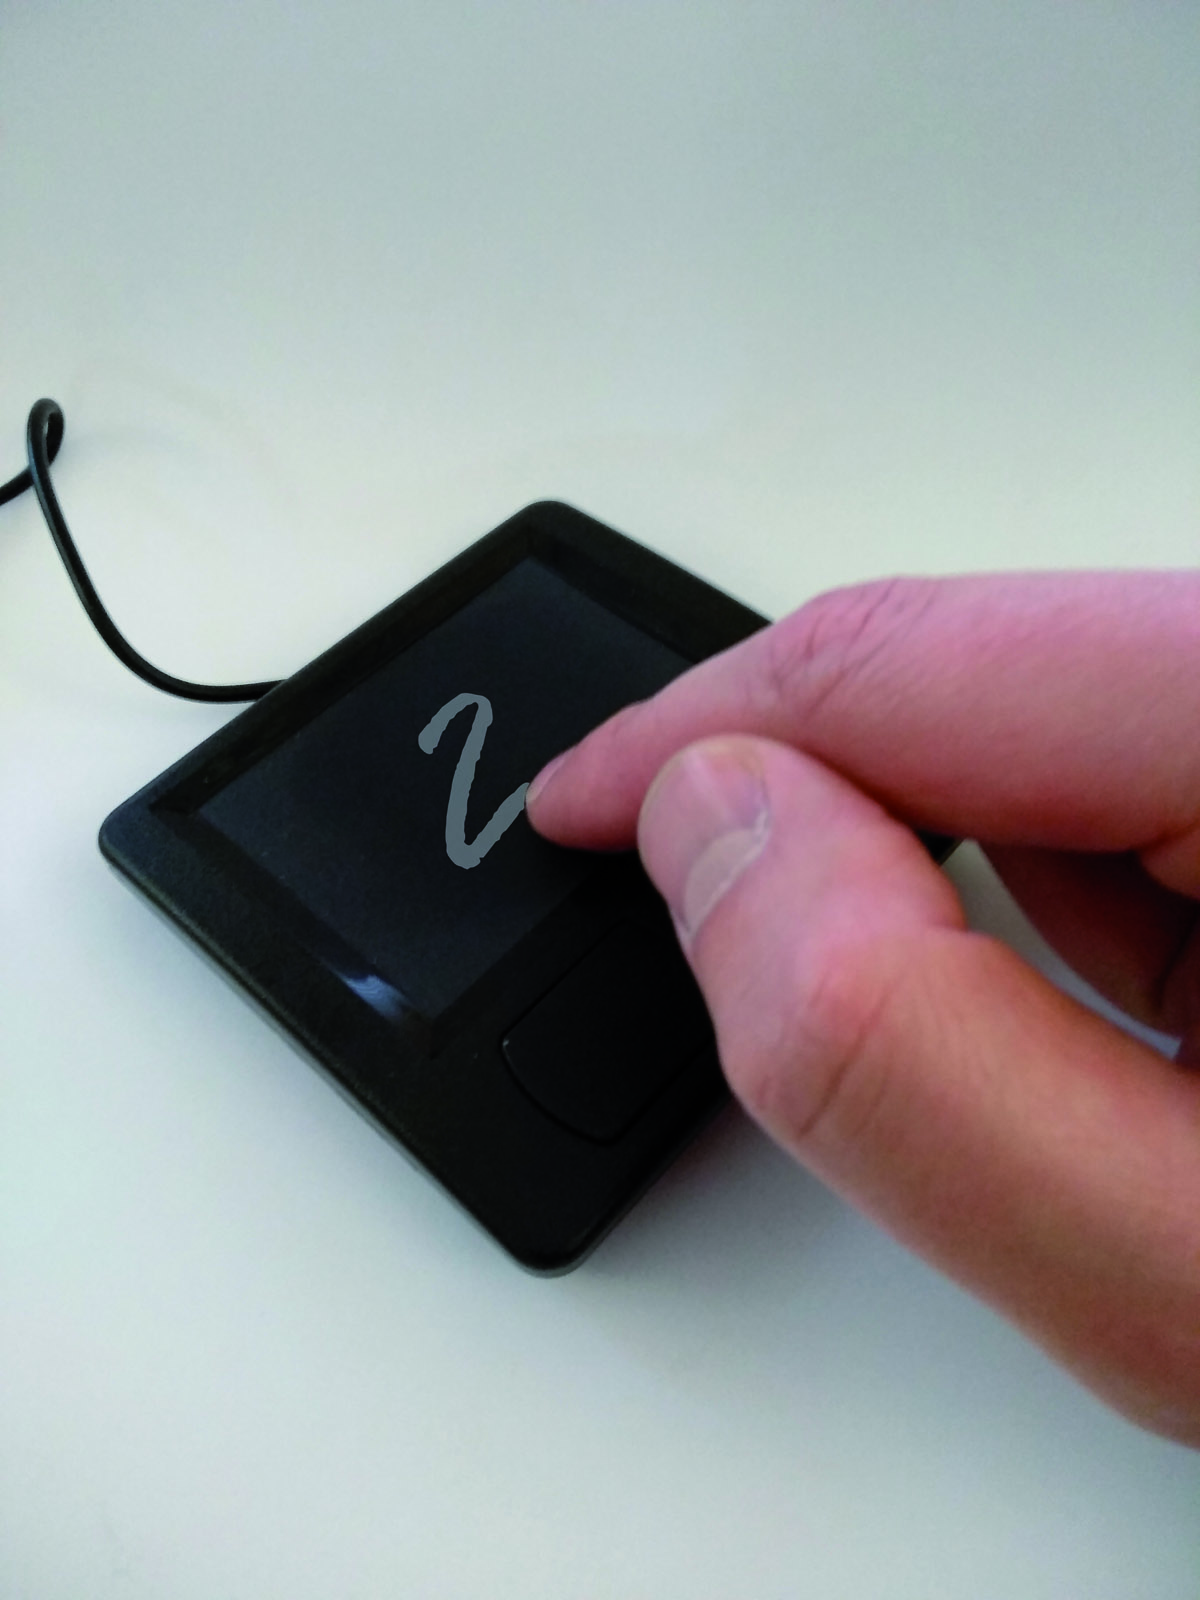 AIfES demonstrator for handwriting recognition. Numbers written by hand on the PS/2 touchpad are identified and output by the microcontroller.